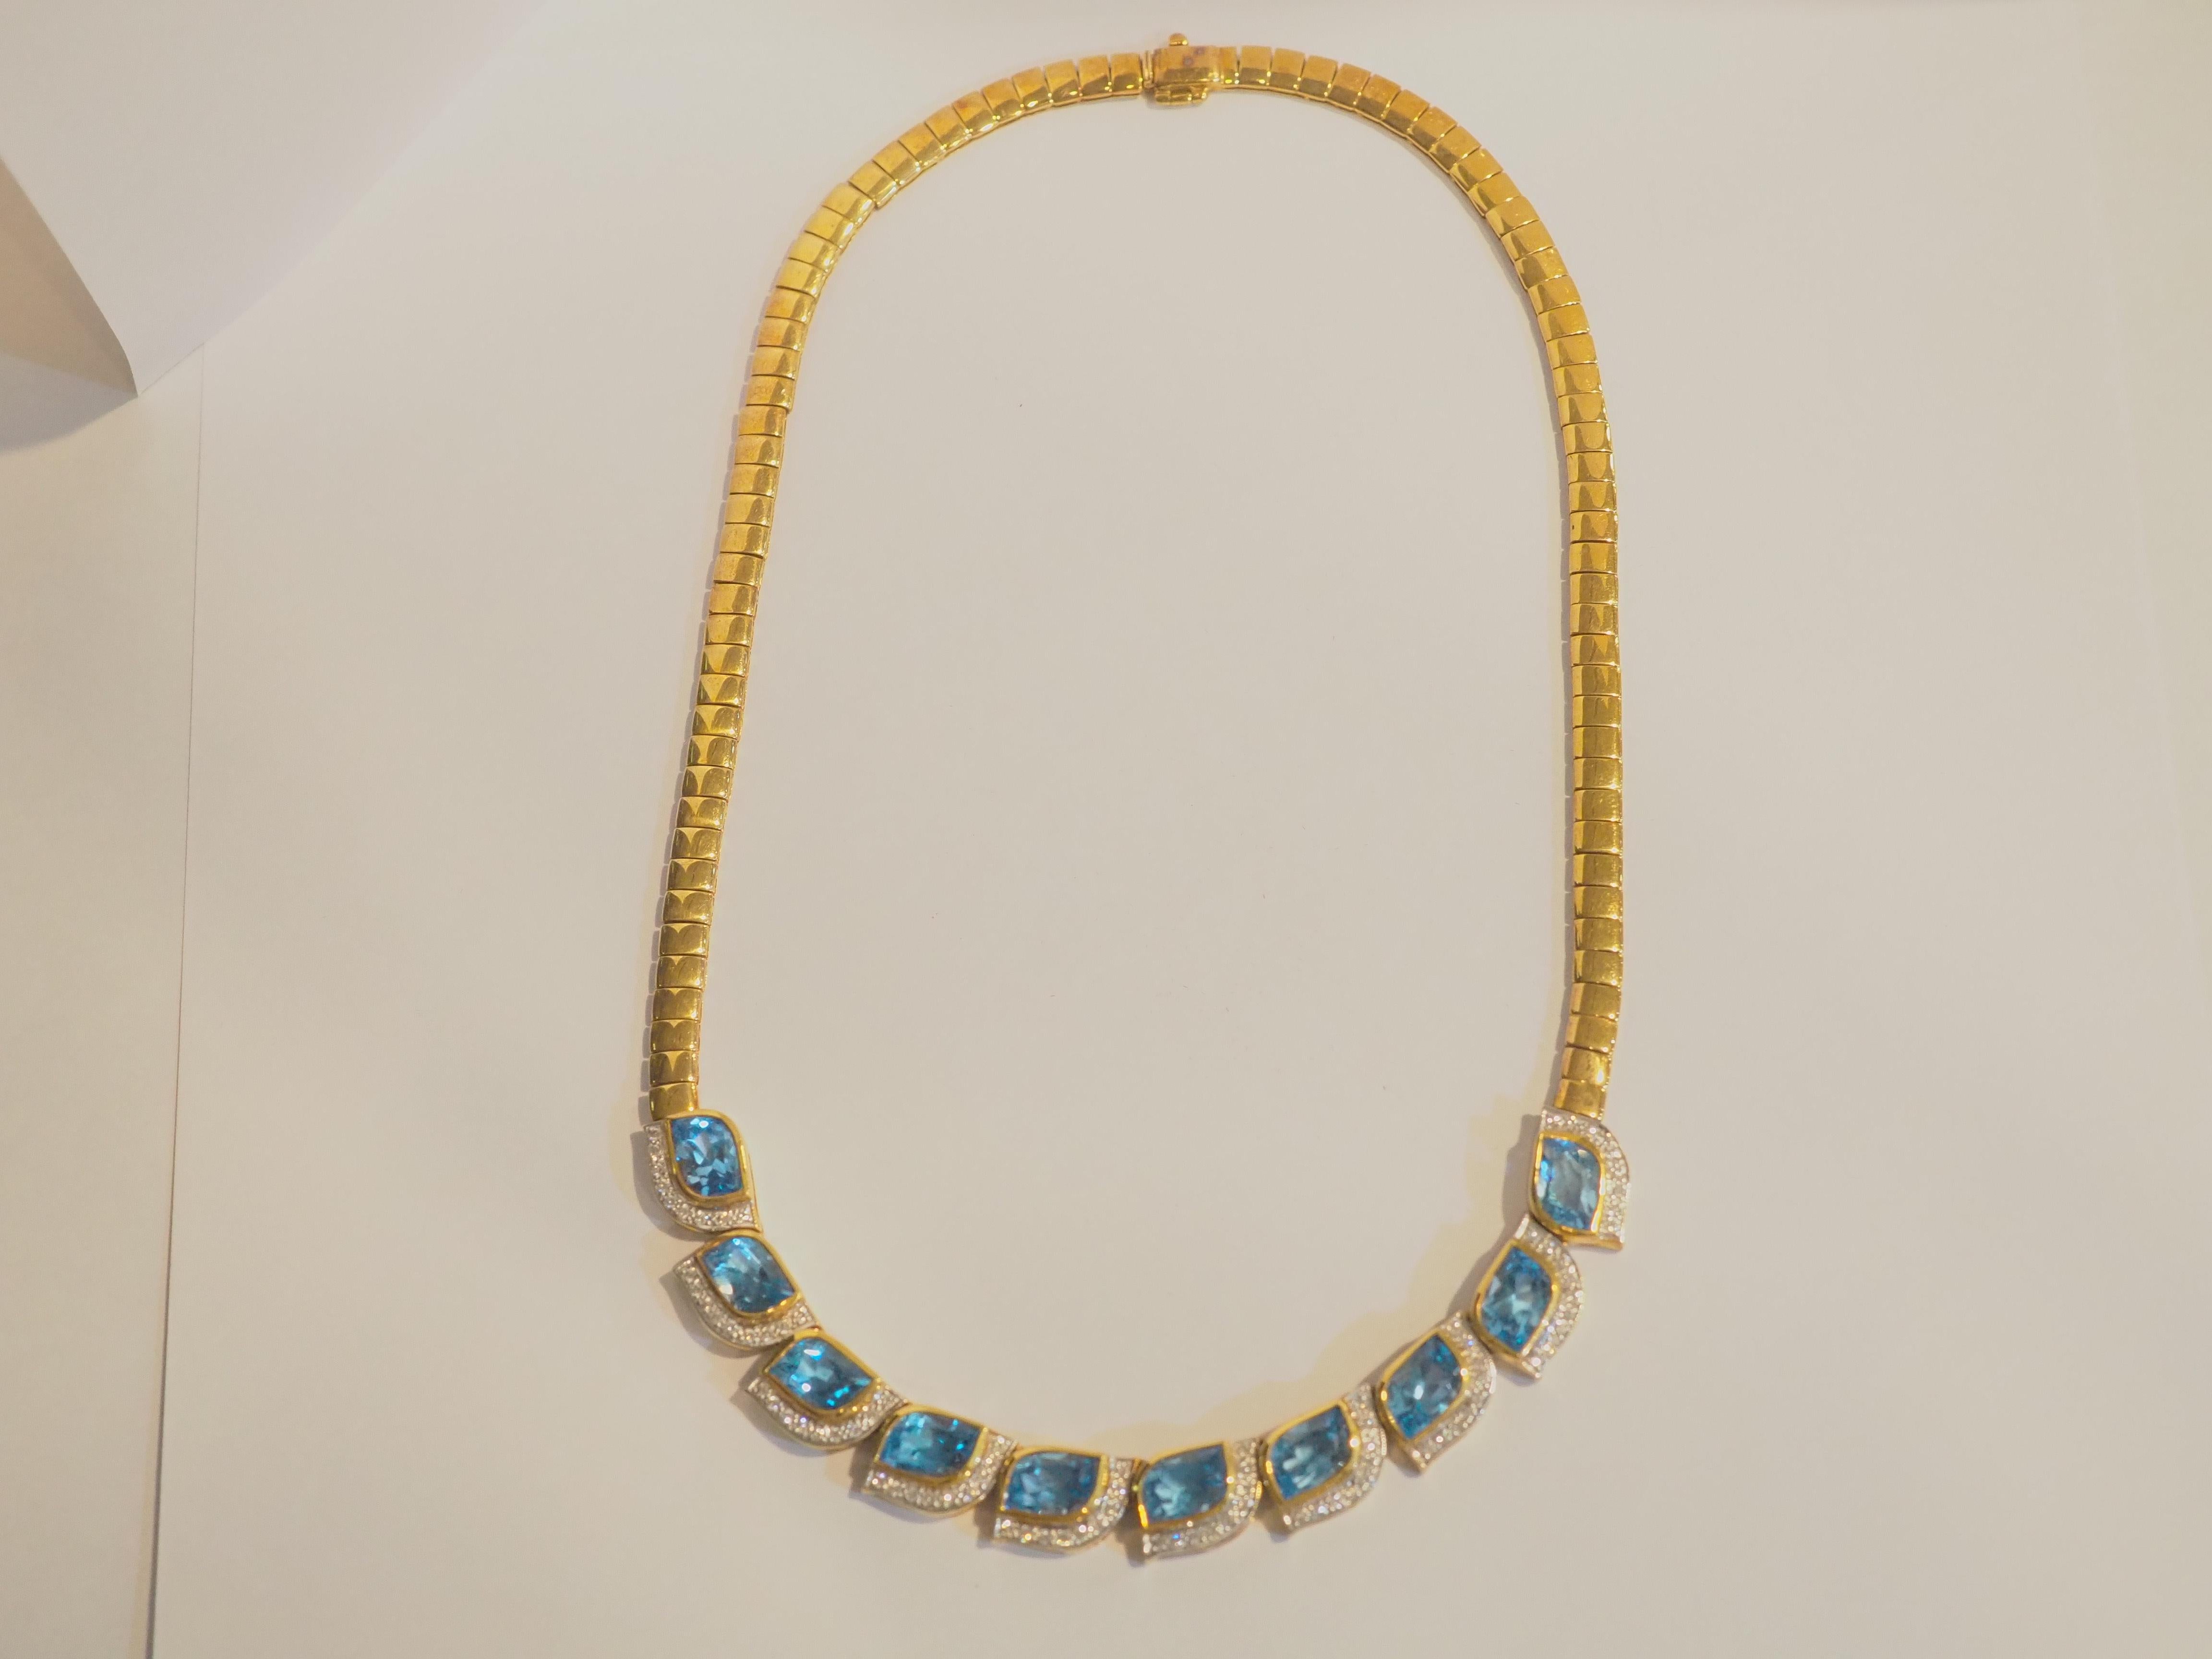 This wonderful piece is a neo- vintage and has never been worn. This beautiful piece is crafted in Thailand using 18K solid yellow gold. The piece is adorned with 10 gorgeous natural mix cut blue topaz and various 90 pave of good quality round pave